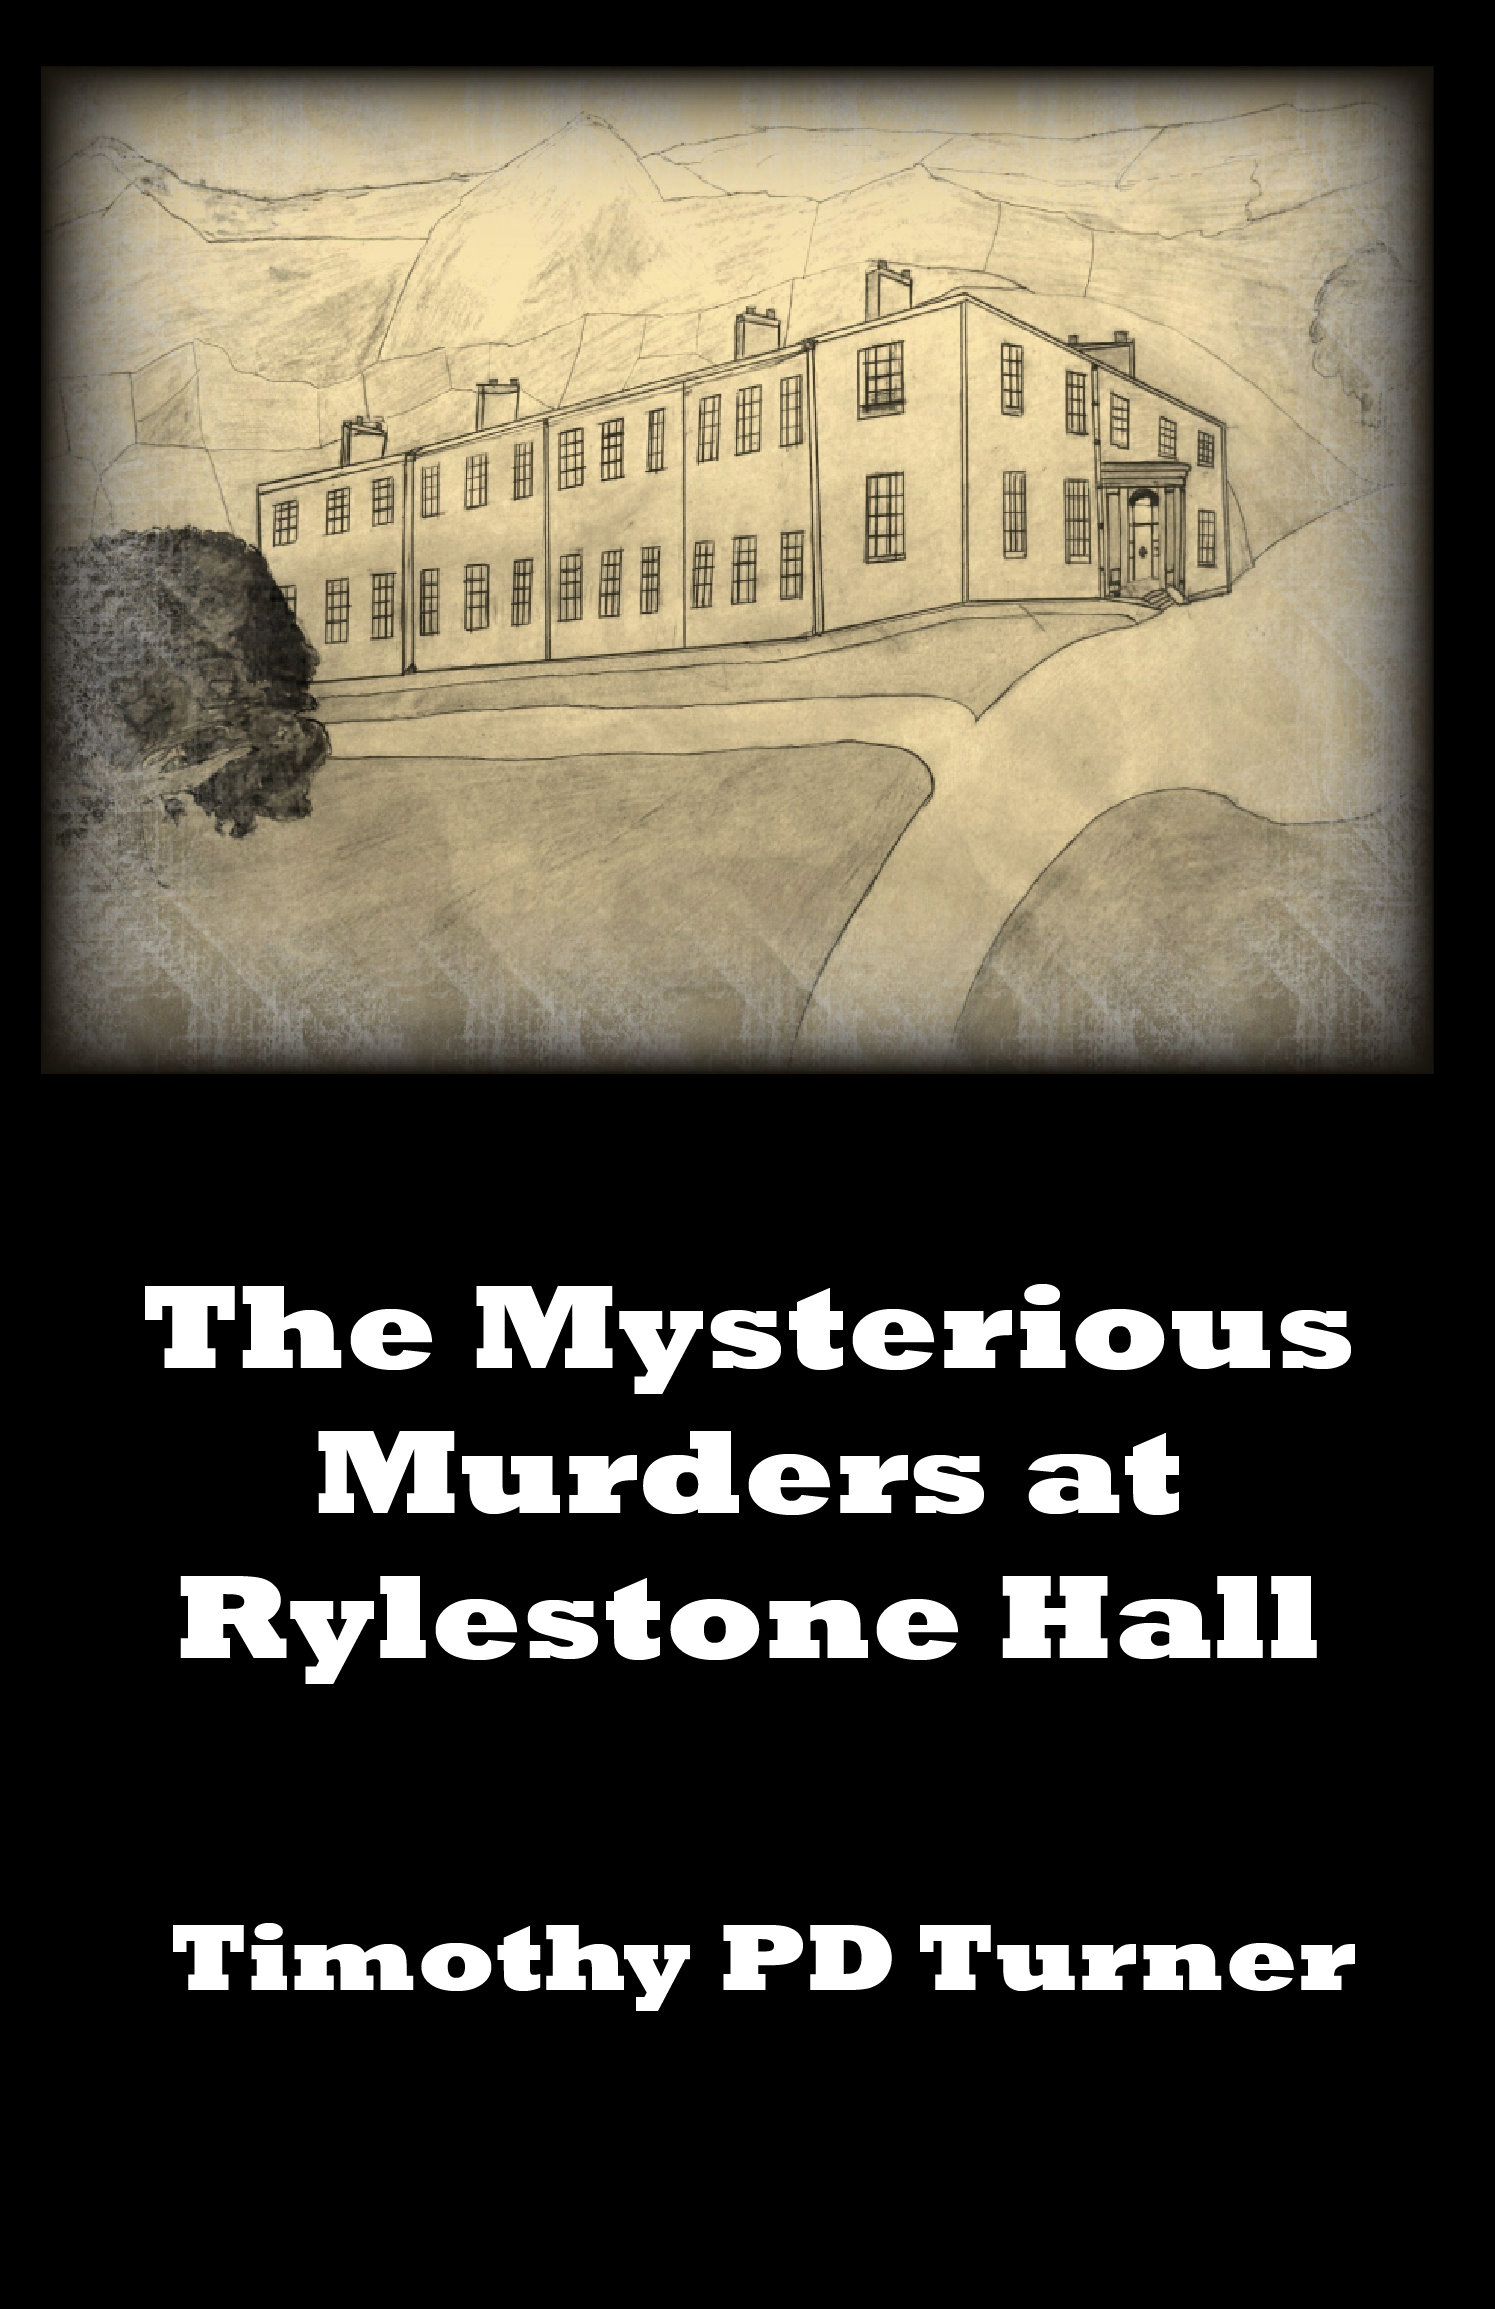 The Mysterious Murders of Rylestone Hall by Timothy PD Turner